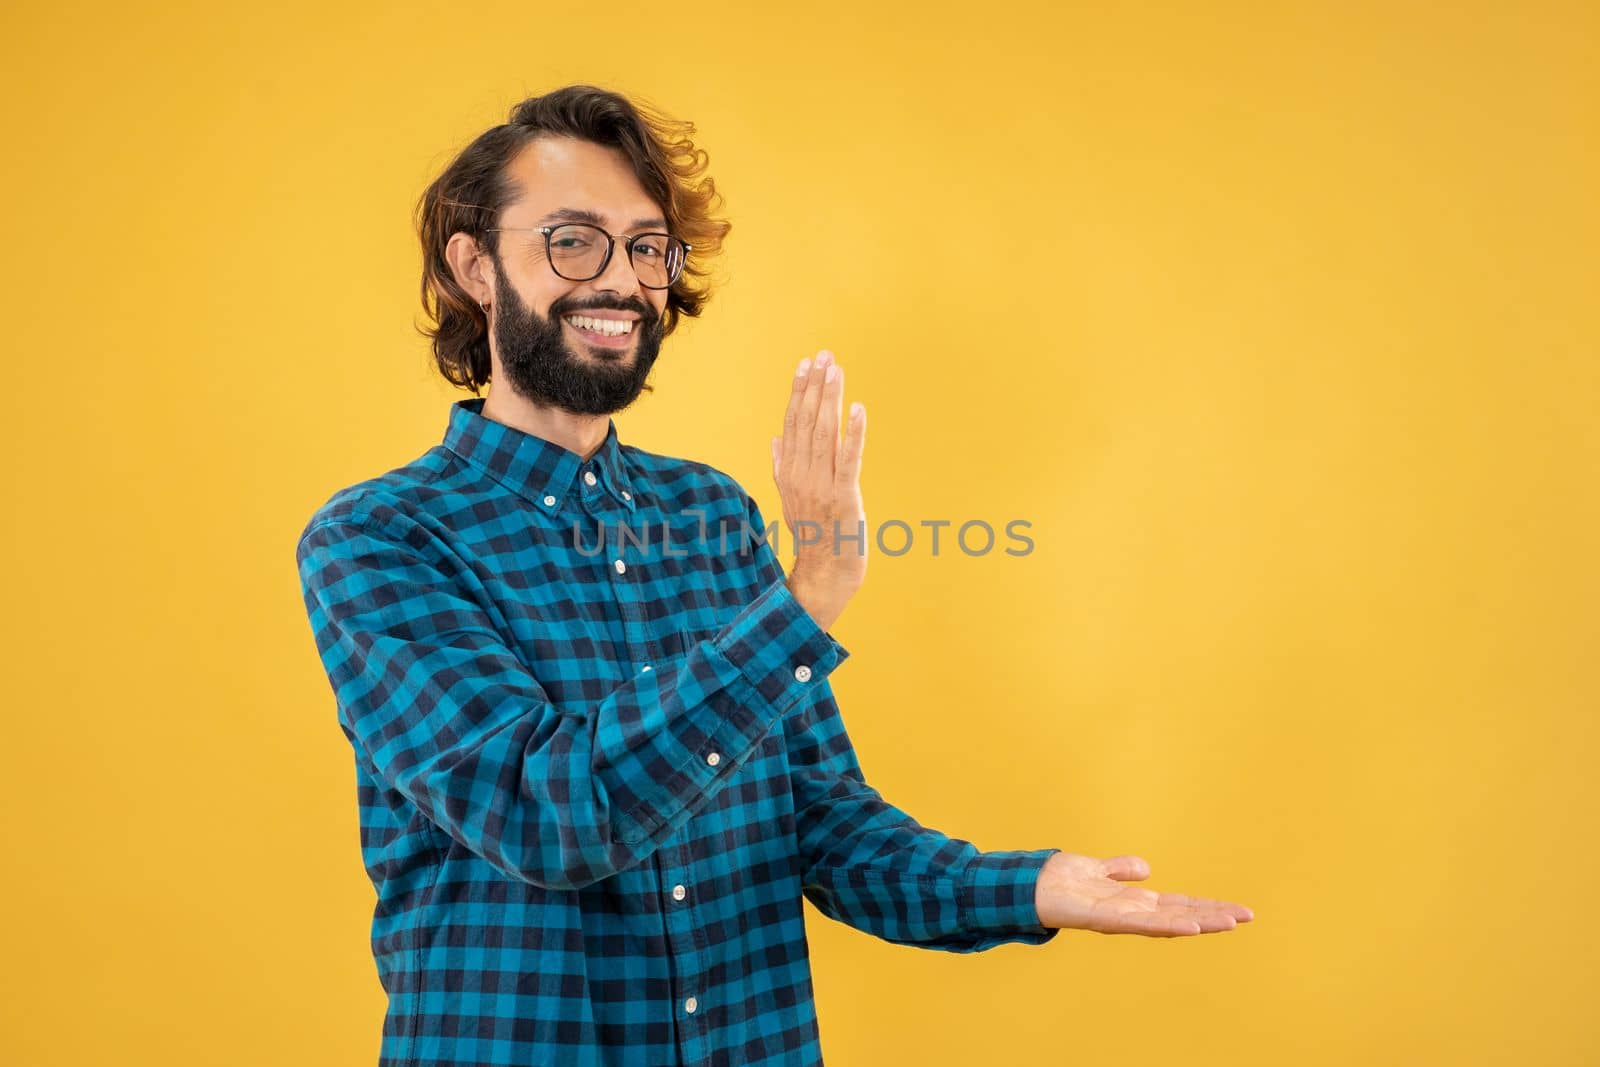 Young man standing over isolated yellow background pointing aside with hands open palms showing by PaulCarr